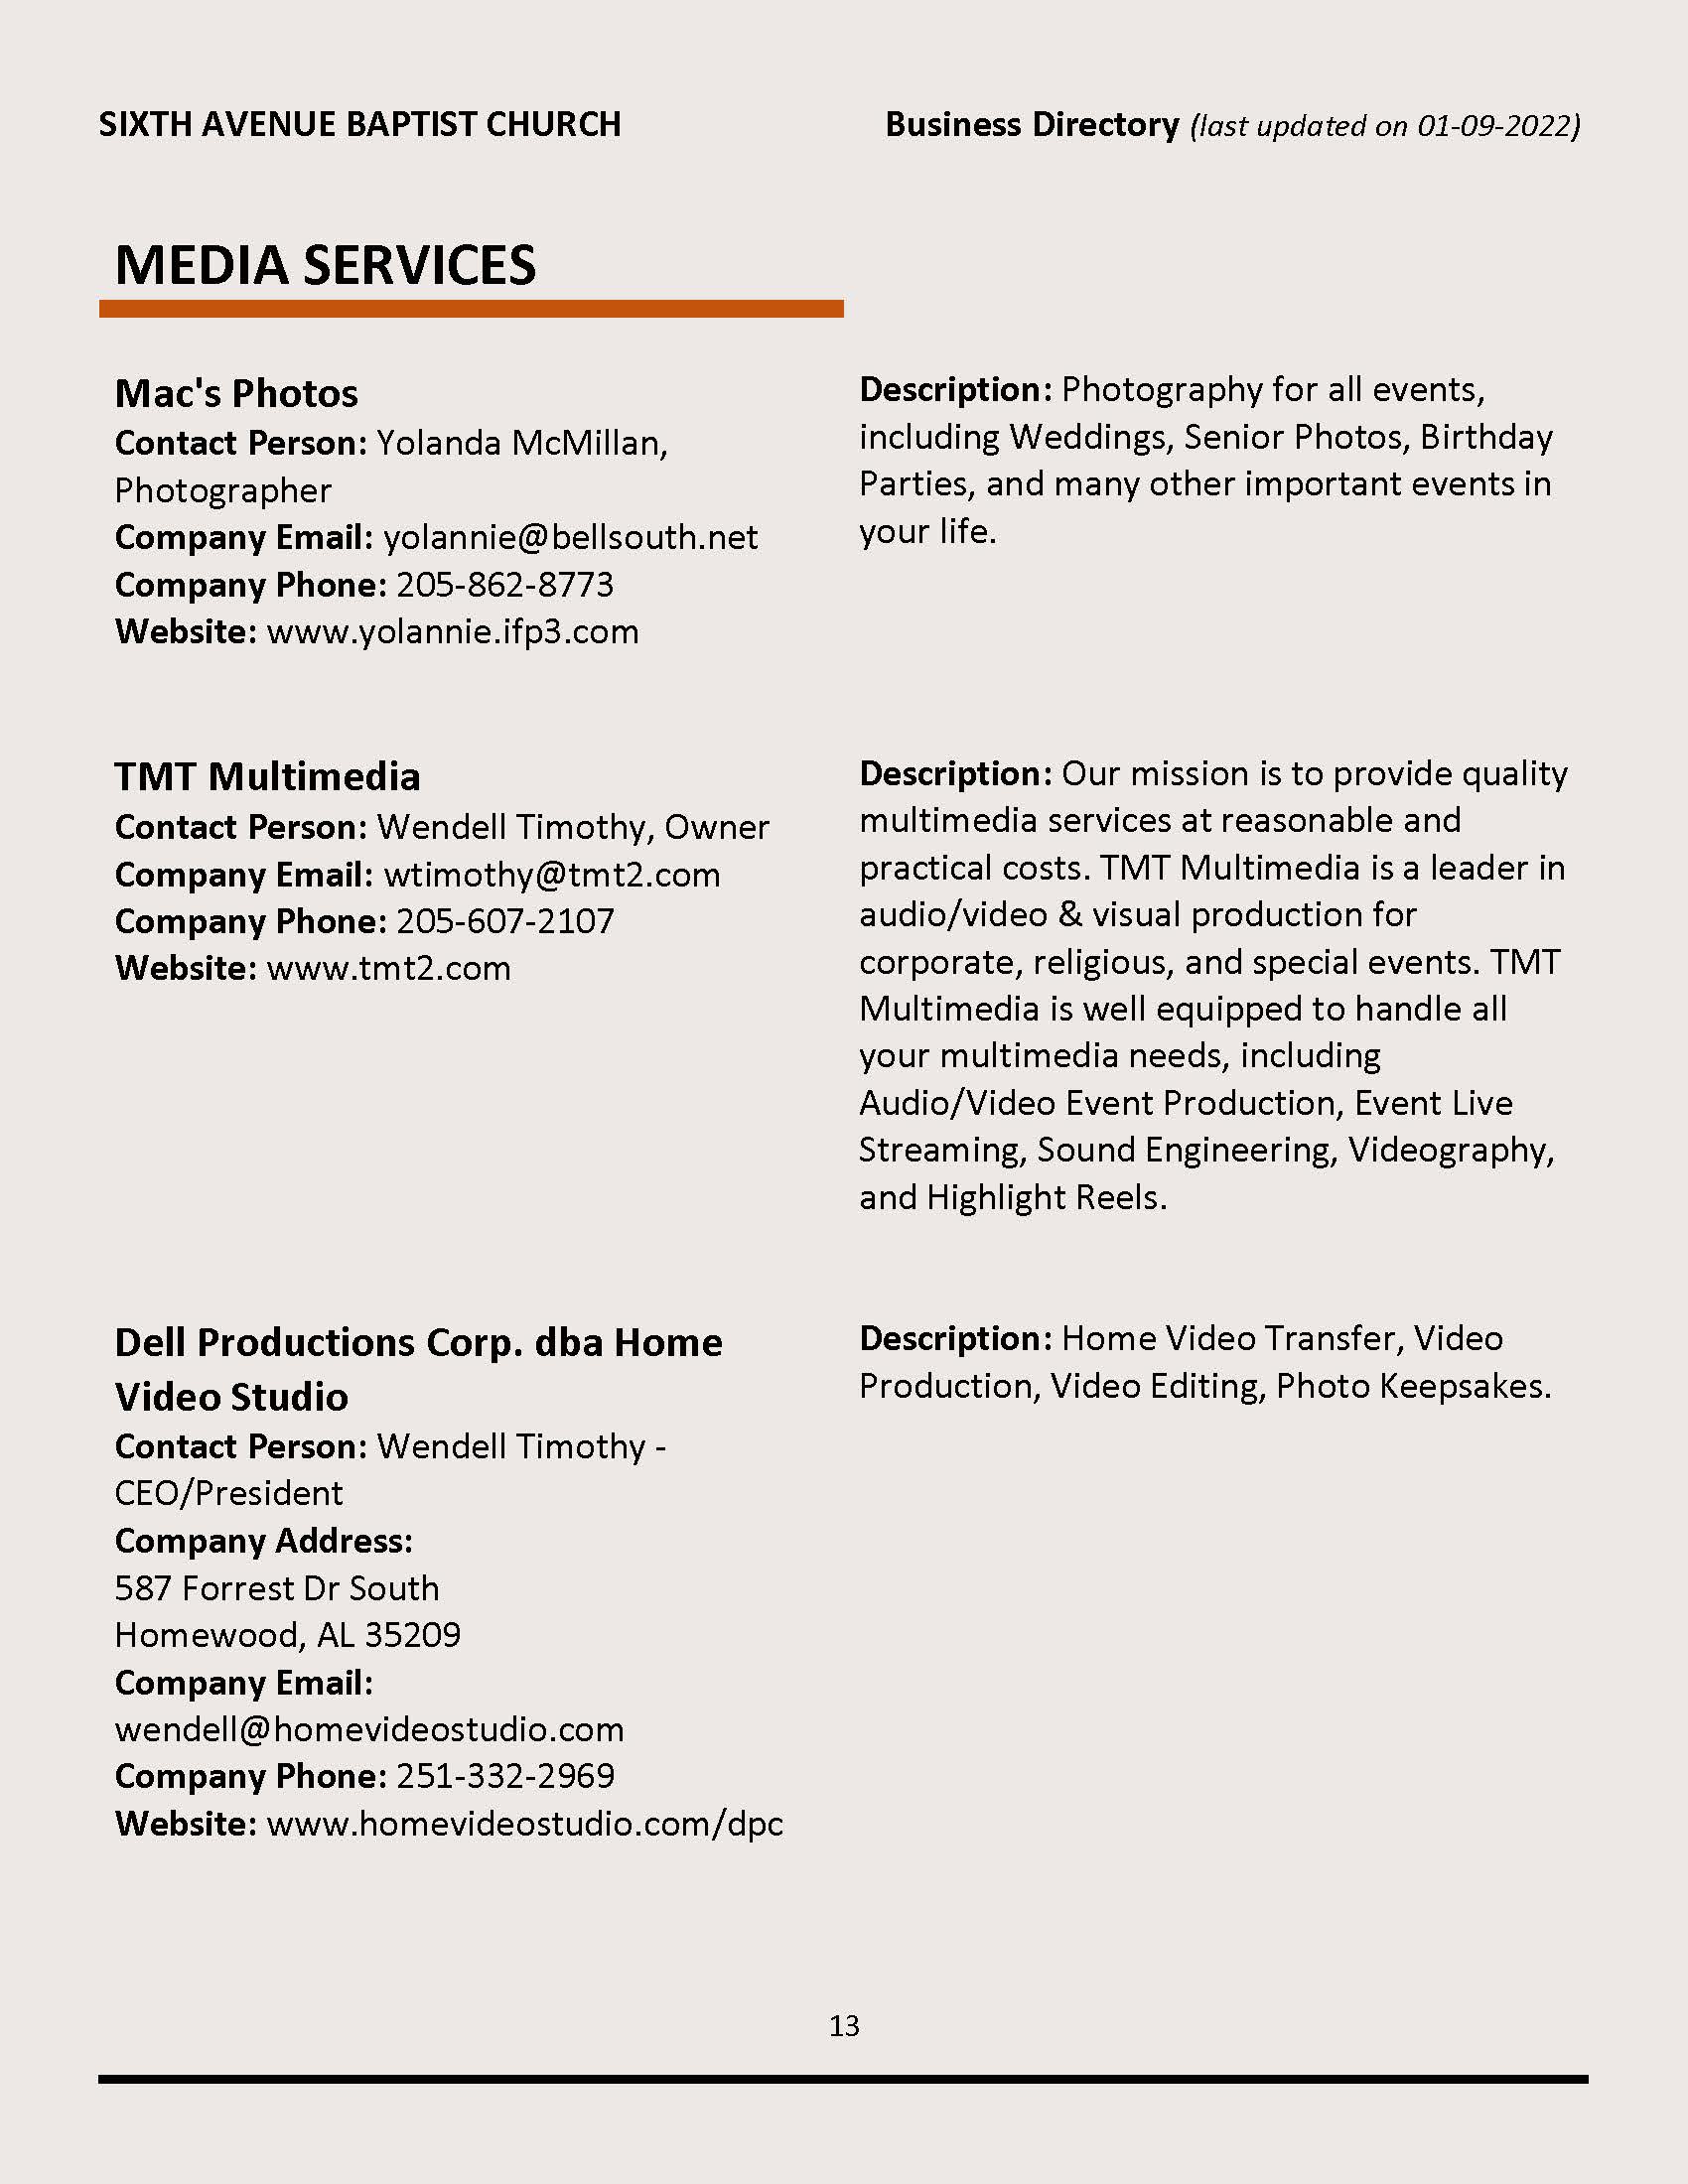 SABC Business Directory (updated 04-10-2022)_Page_13